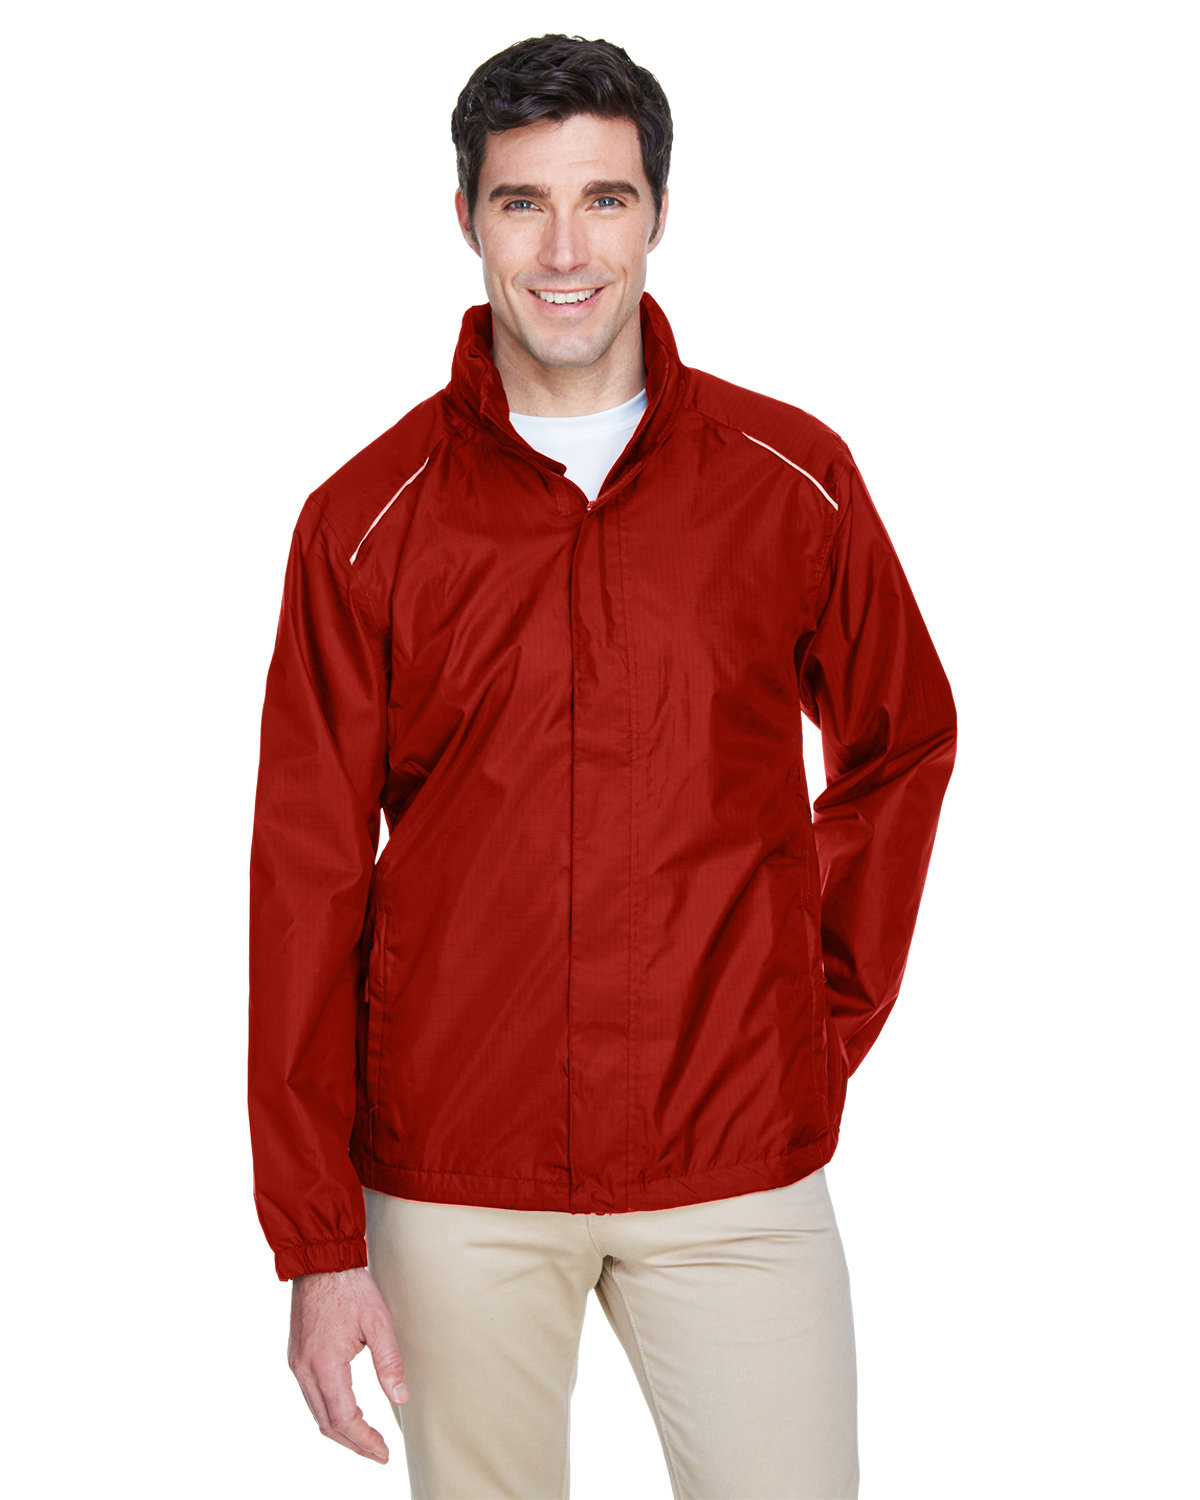 CORE365 Men's Climate Seam-Sealed Lightweight Variegated Ripstop Jacket classic red 